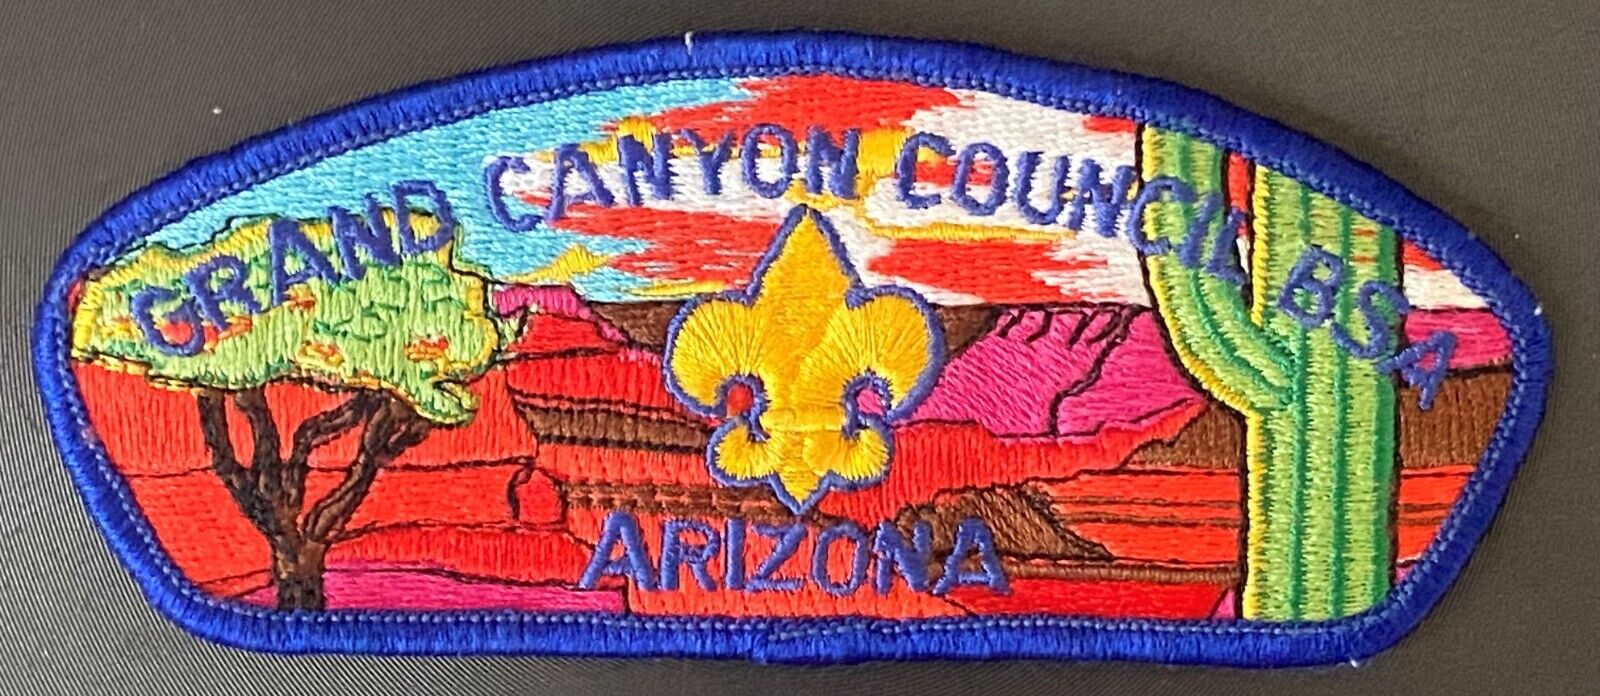 Grand Canyon Council BSA S3 CSP Plastic Back Used